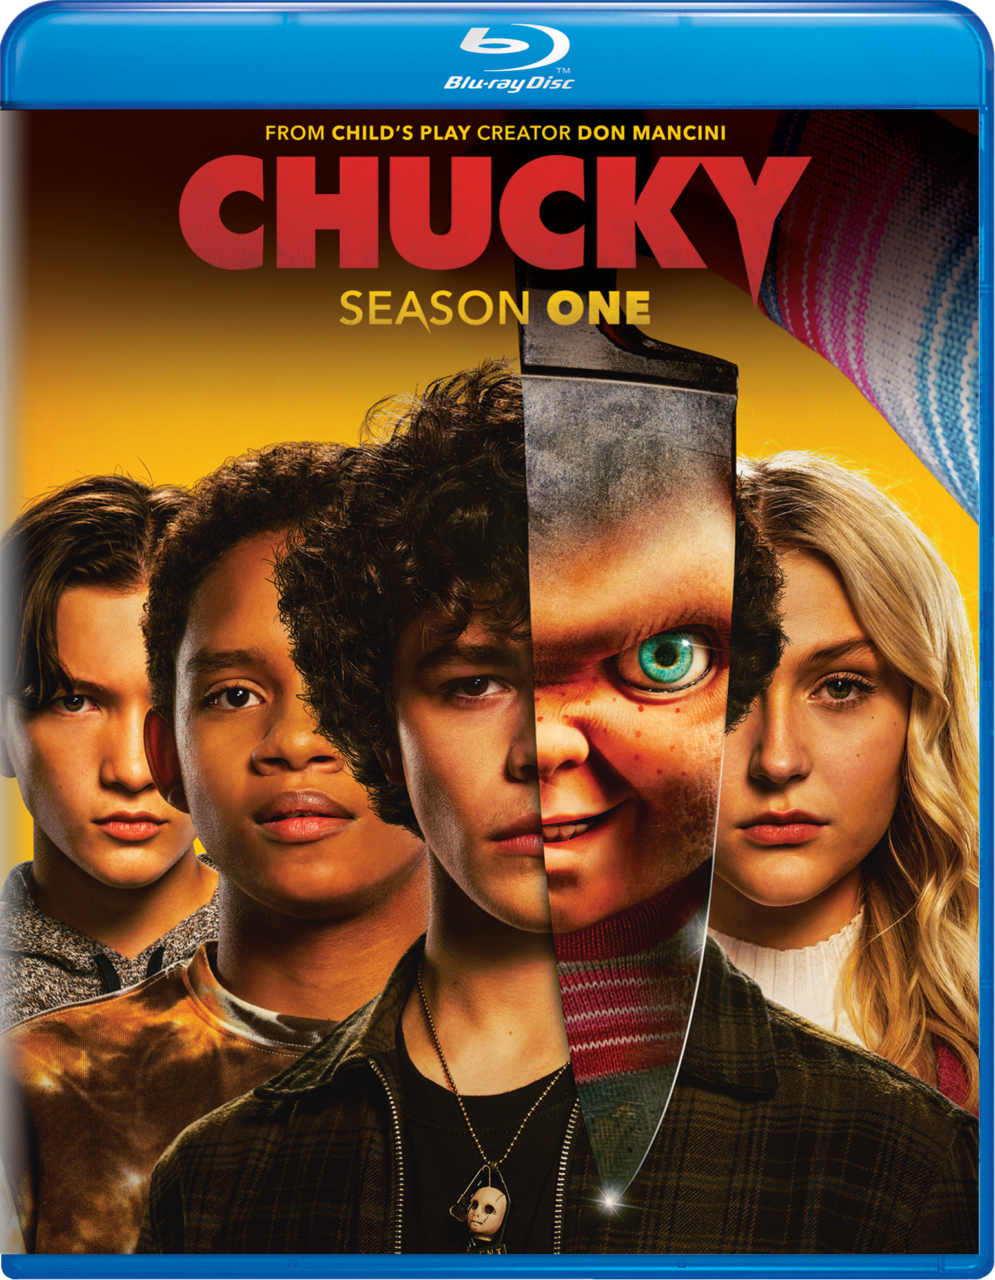 Chucky Season One Blu-Ray cover (Universal Pictures Home Entertainment)